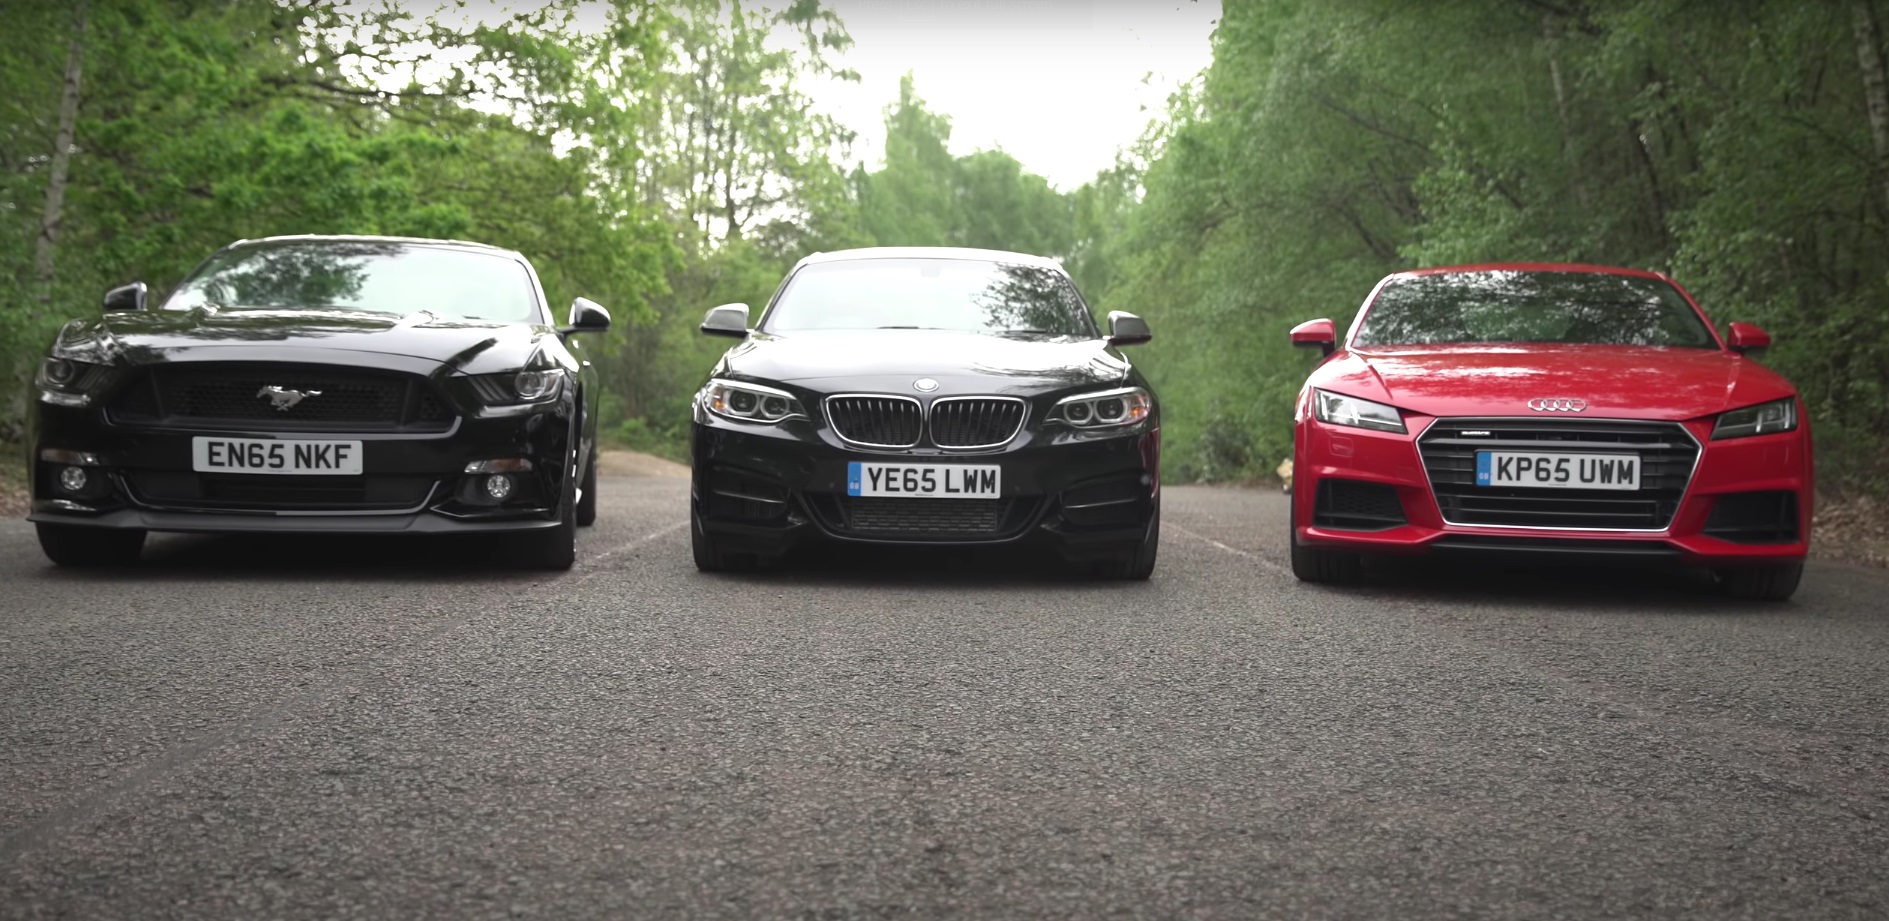 Video: 2017 Ford Mustang vs Audi TT vs BMW M235i - Coupes Review